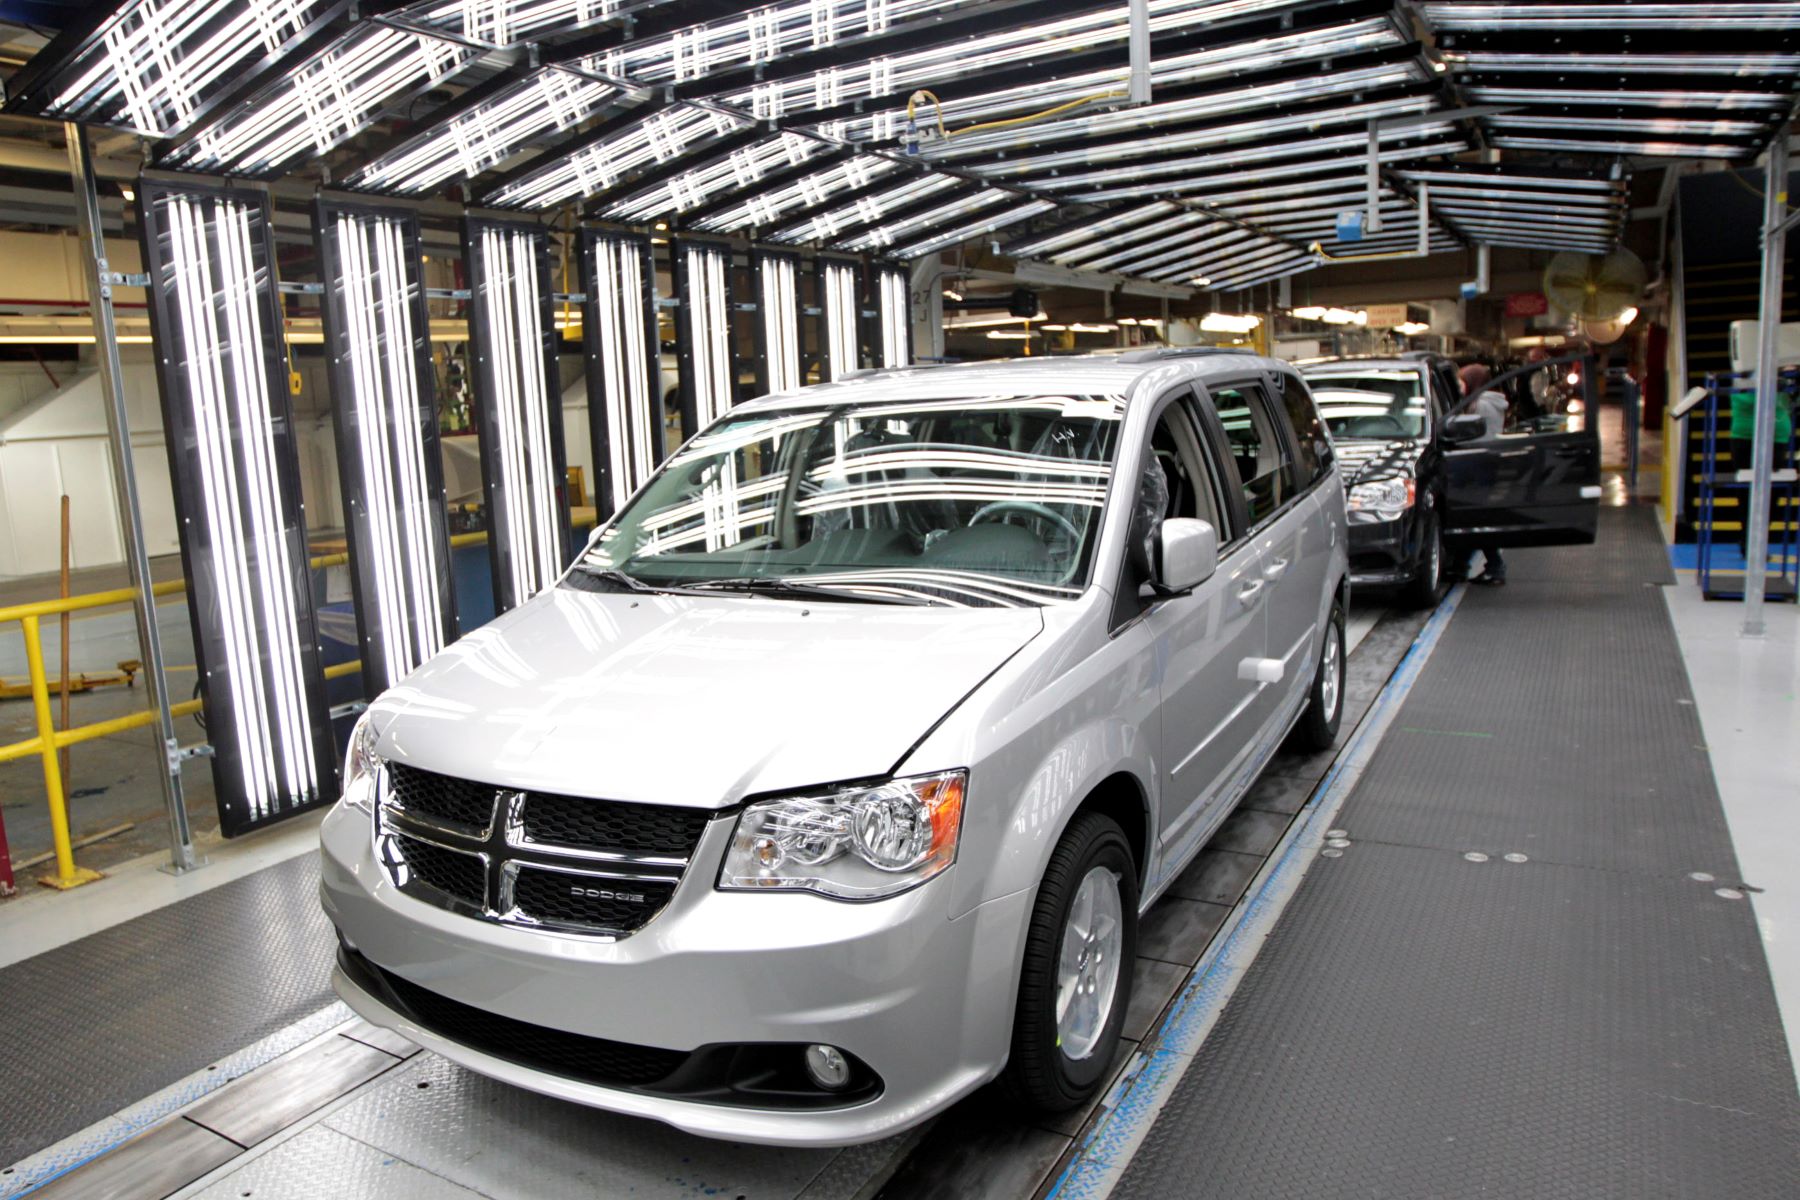 Dodge Grand Caravan production from Chrysler at an assembly plant in Windsor, Ontario, Canada